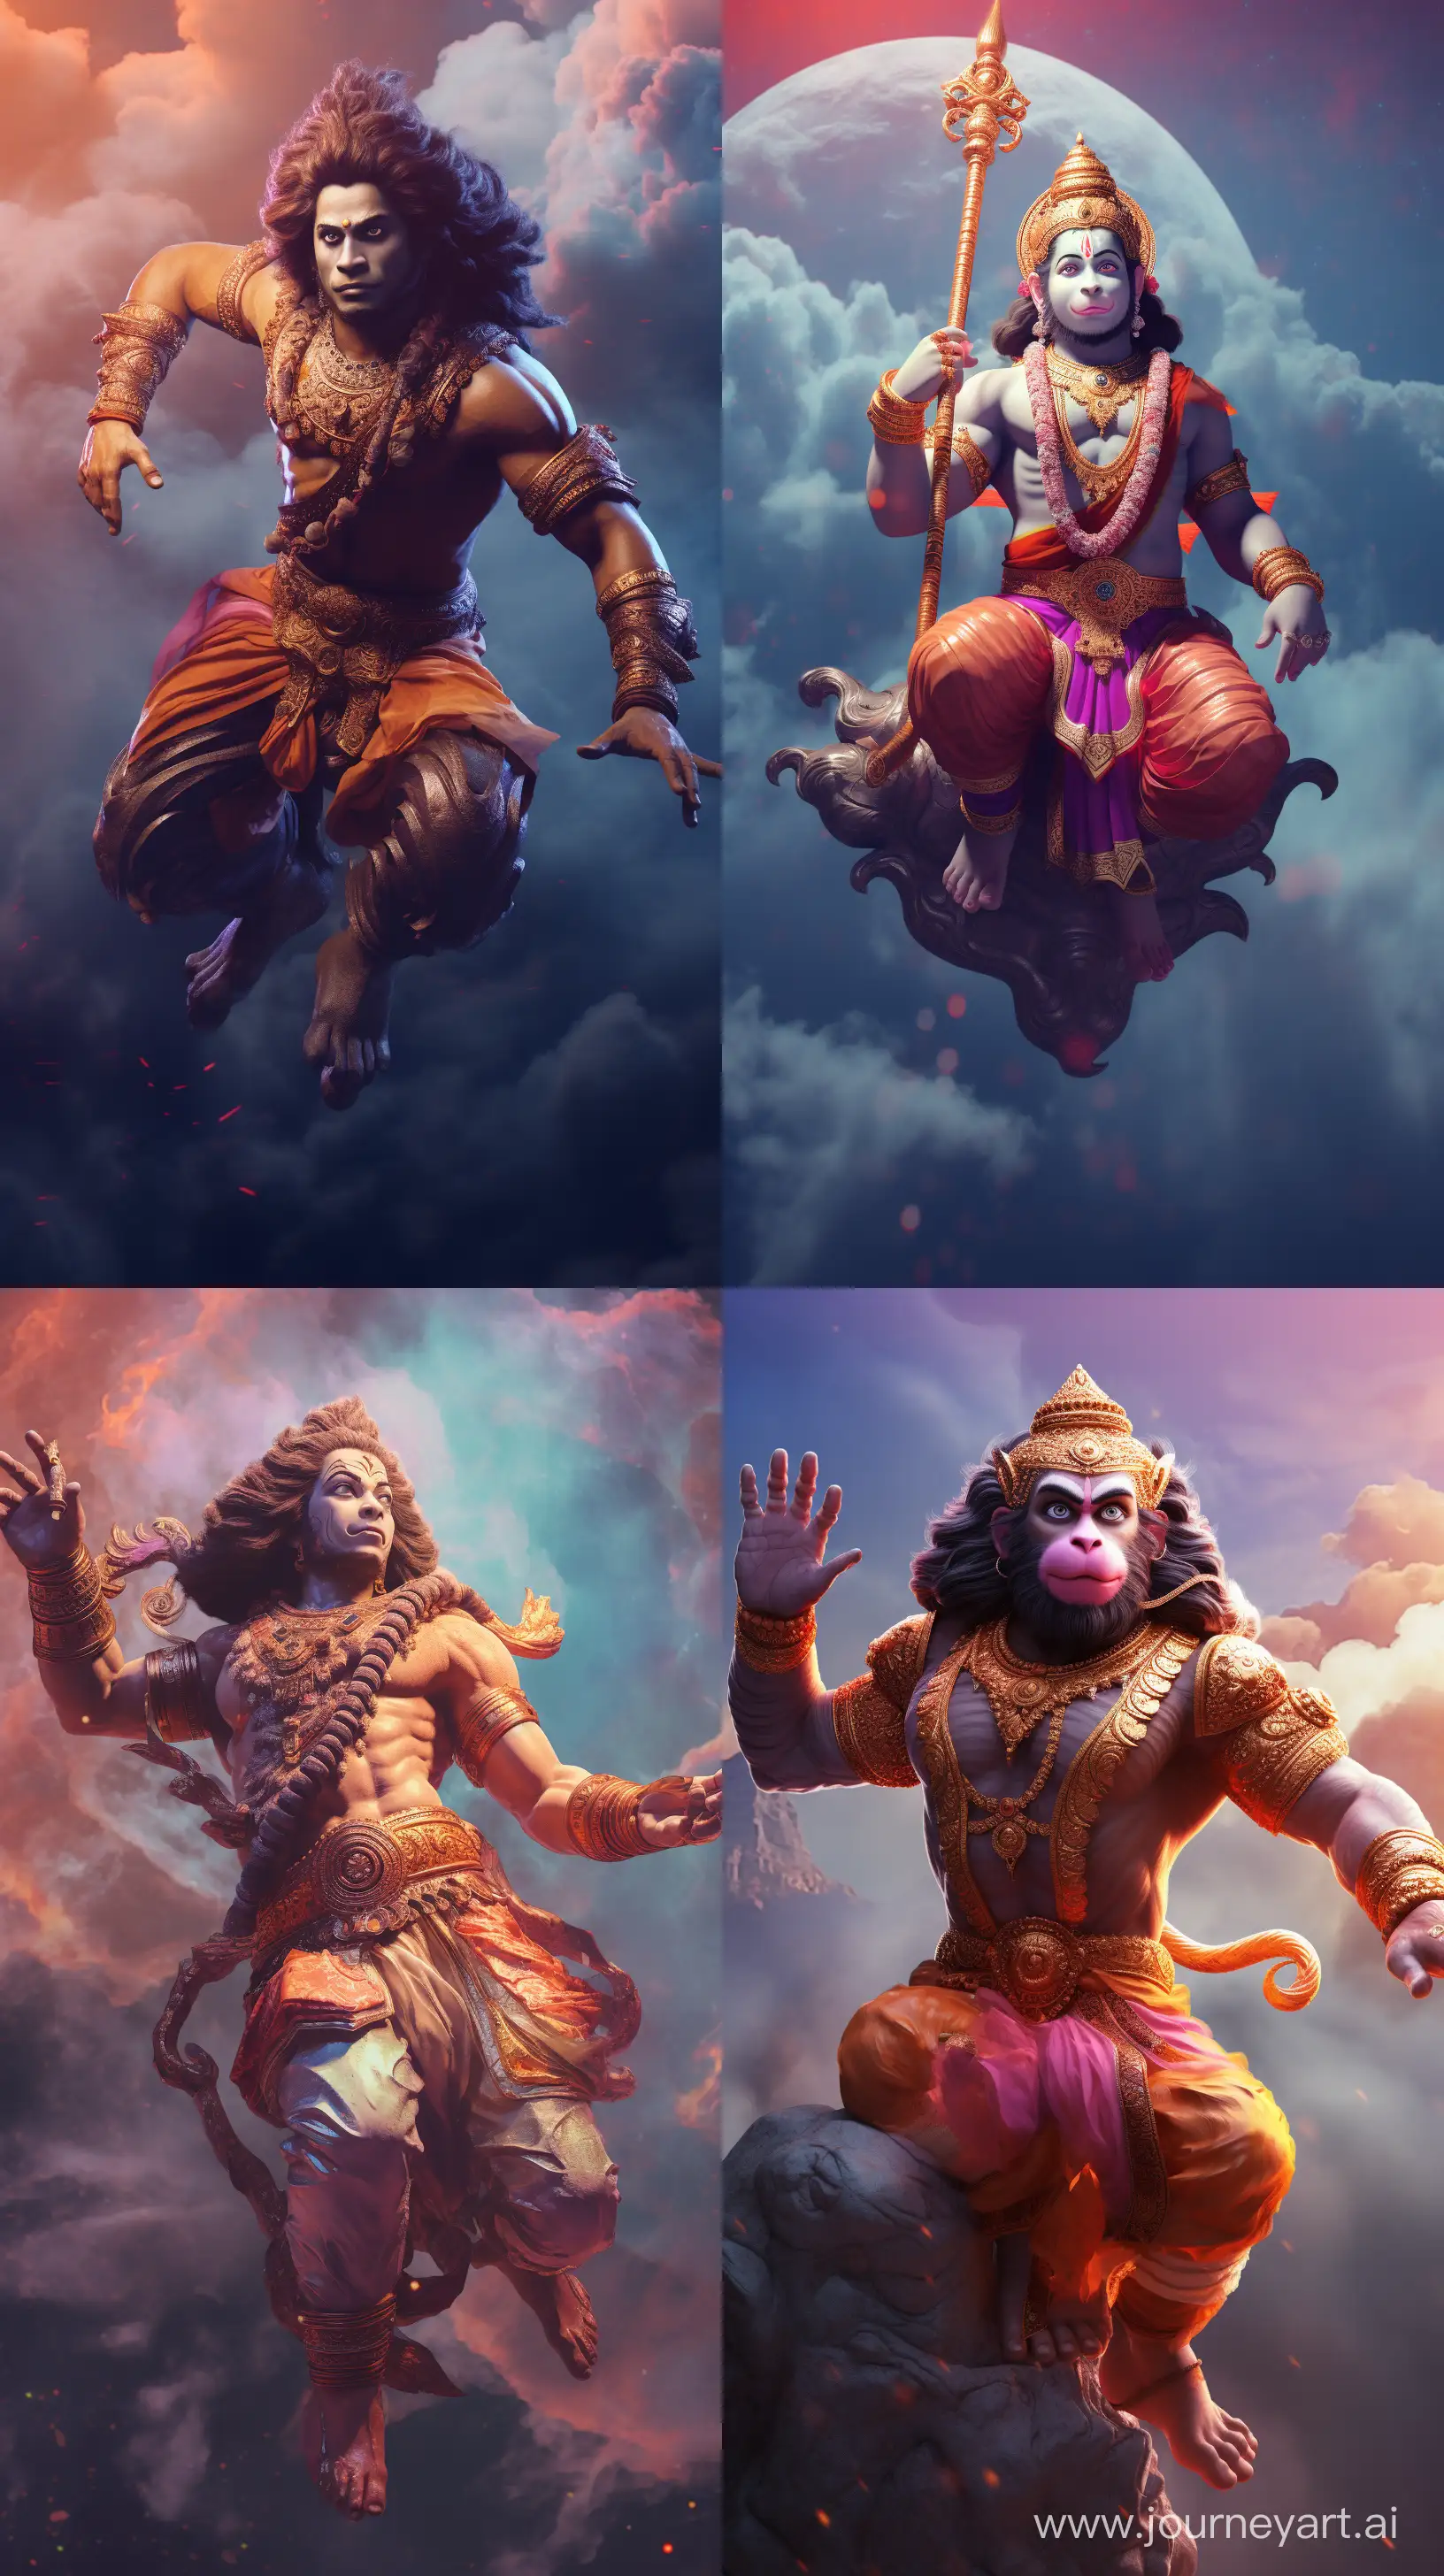 Realistic and colorful images depicting Hanuman from Hinduism, flying in the sky, intricate details, 8k quality --ar 9:16